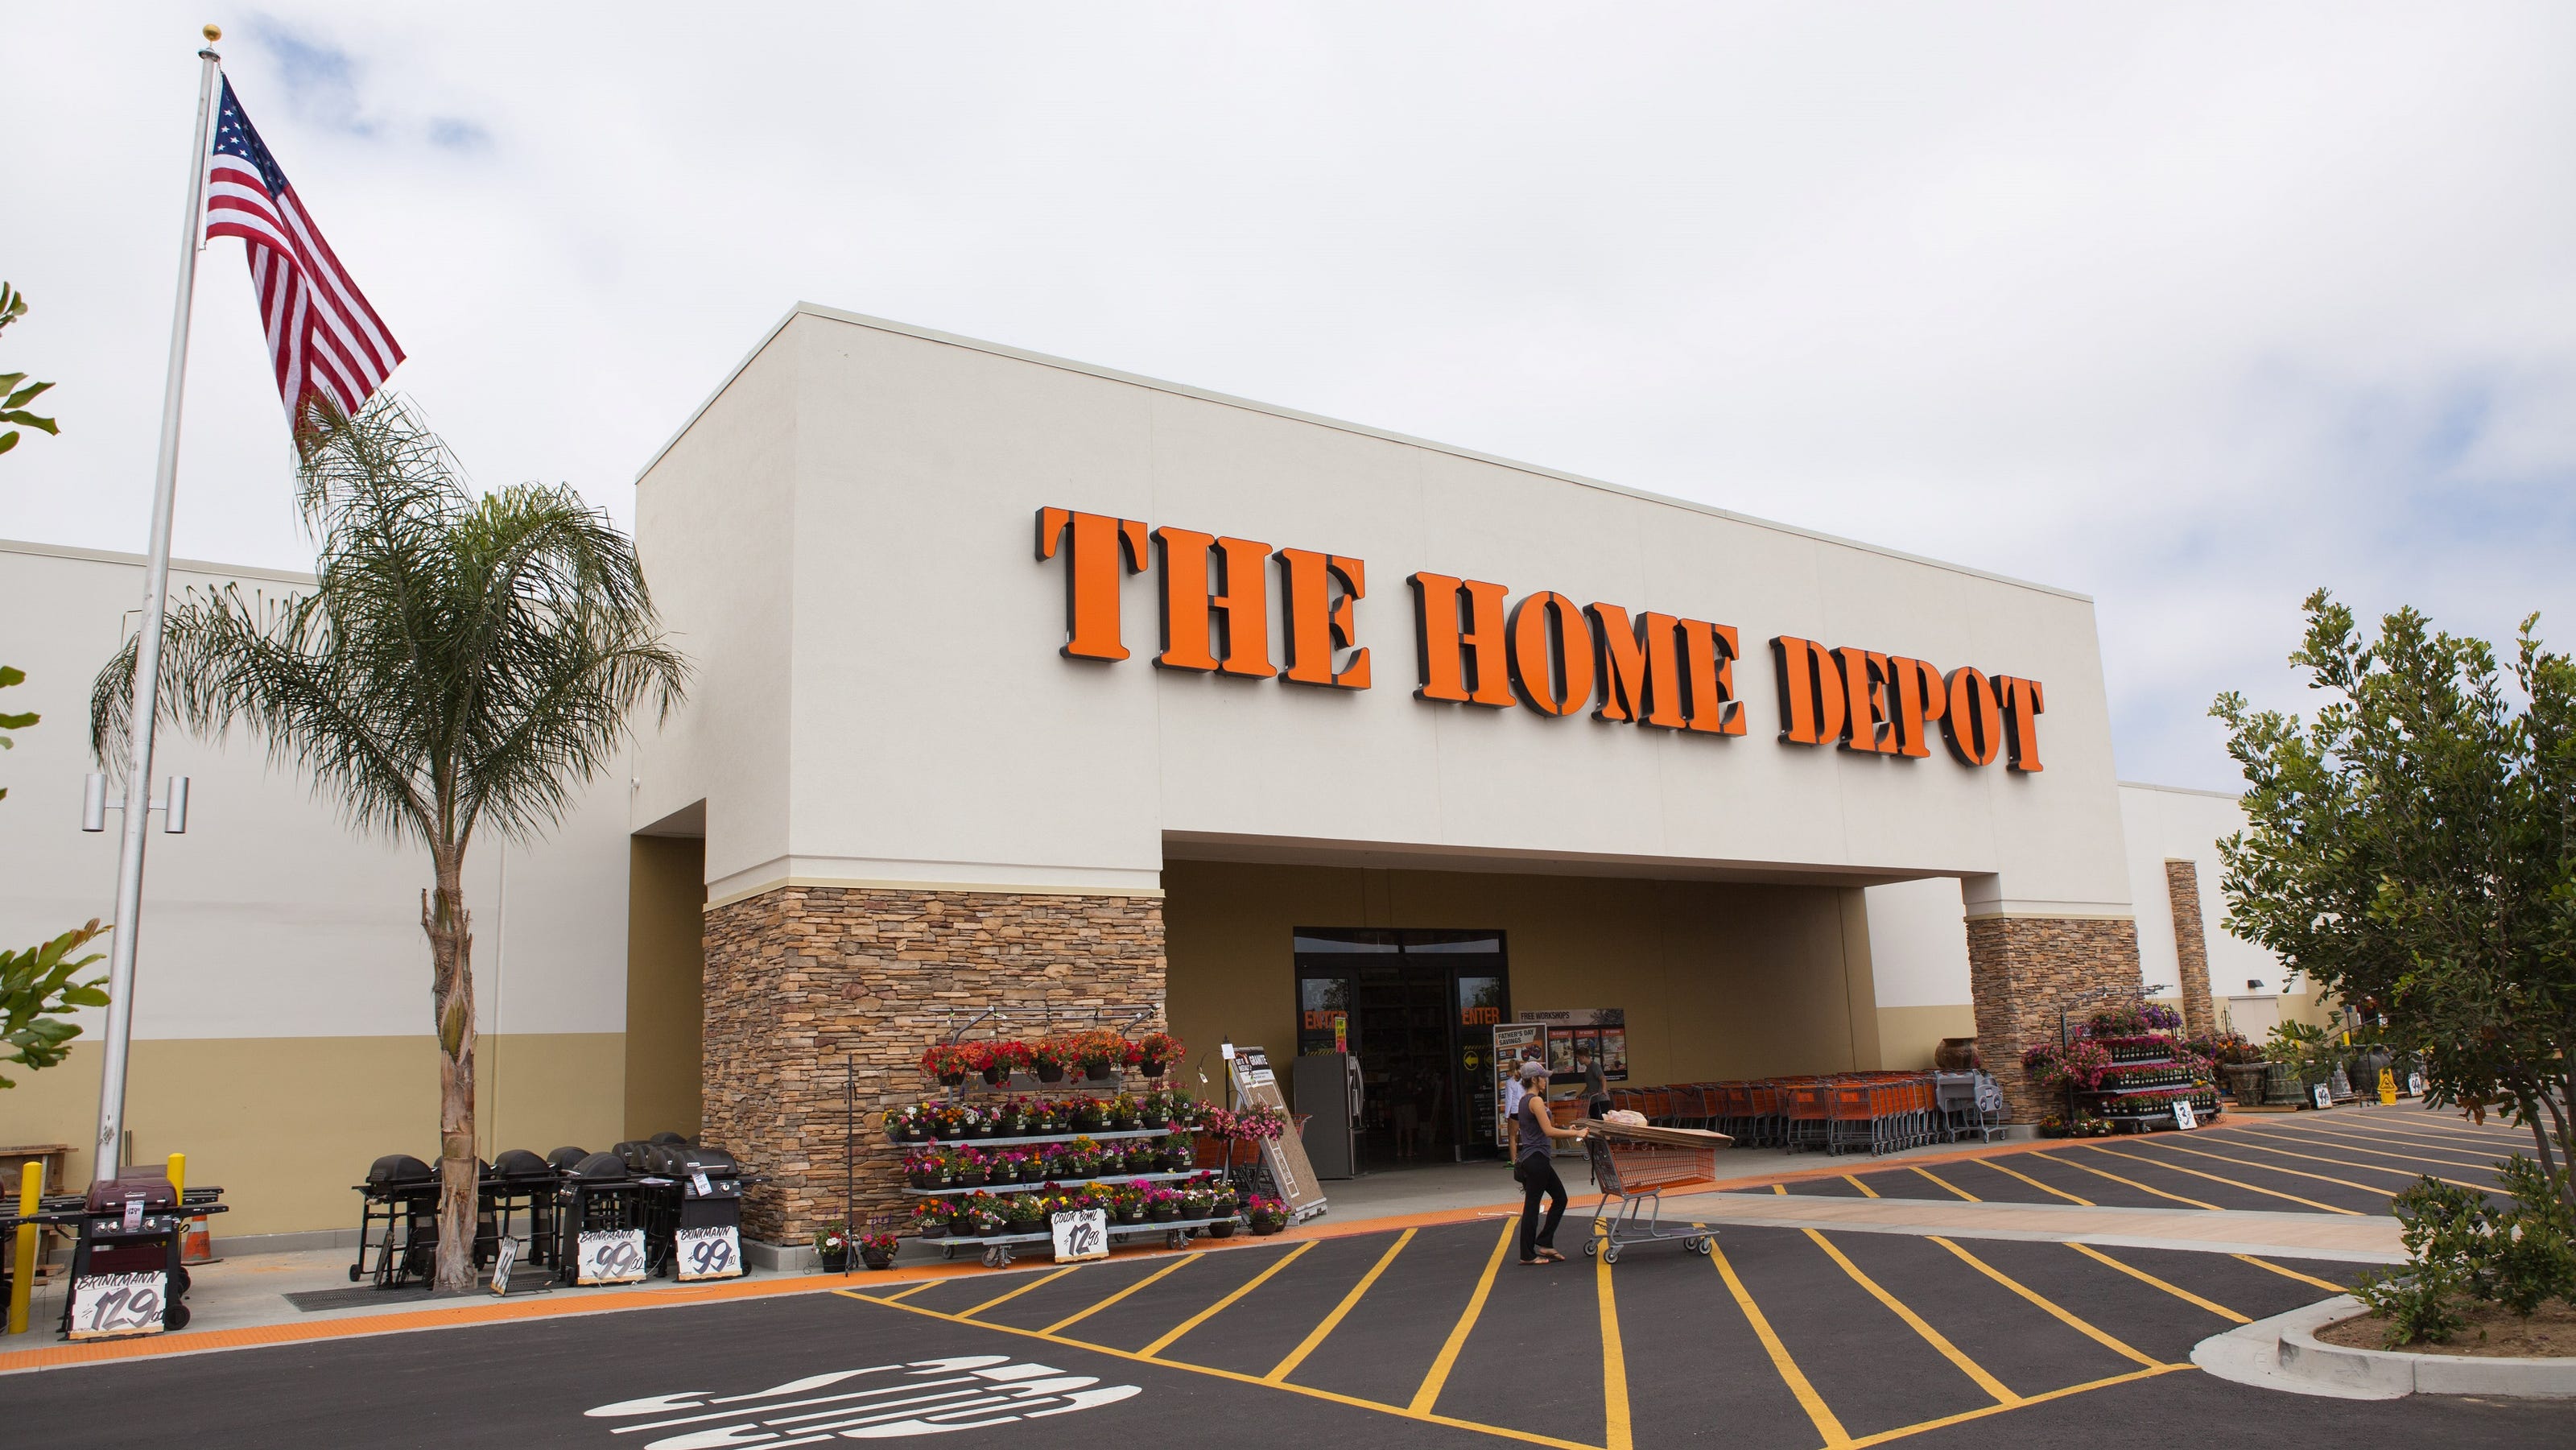 Home Depot vs. Lowe's: Which home improvement retailer is a better buy?